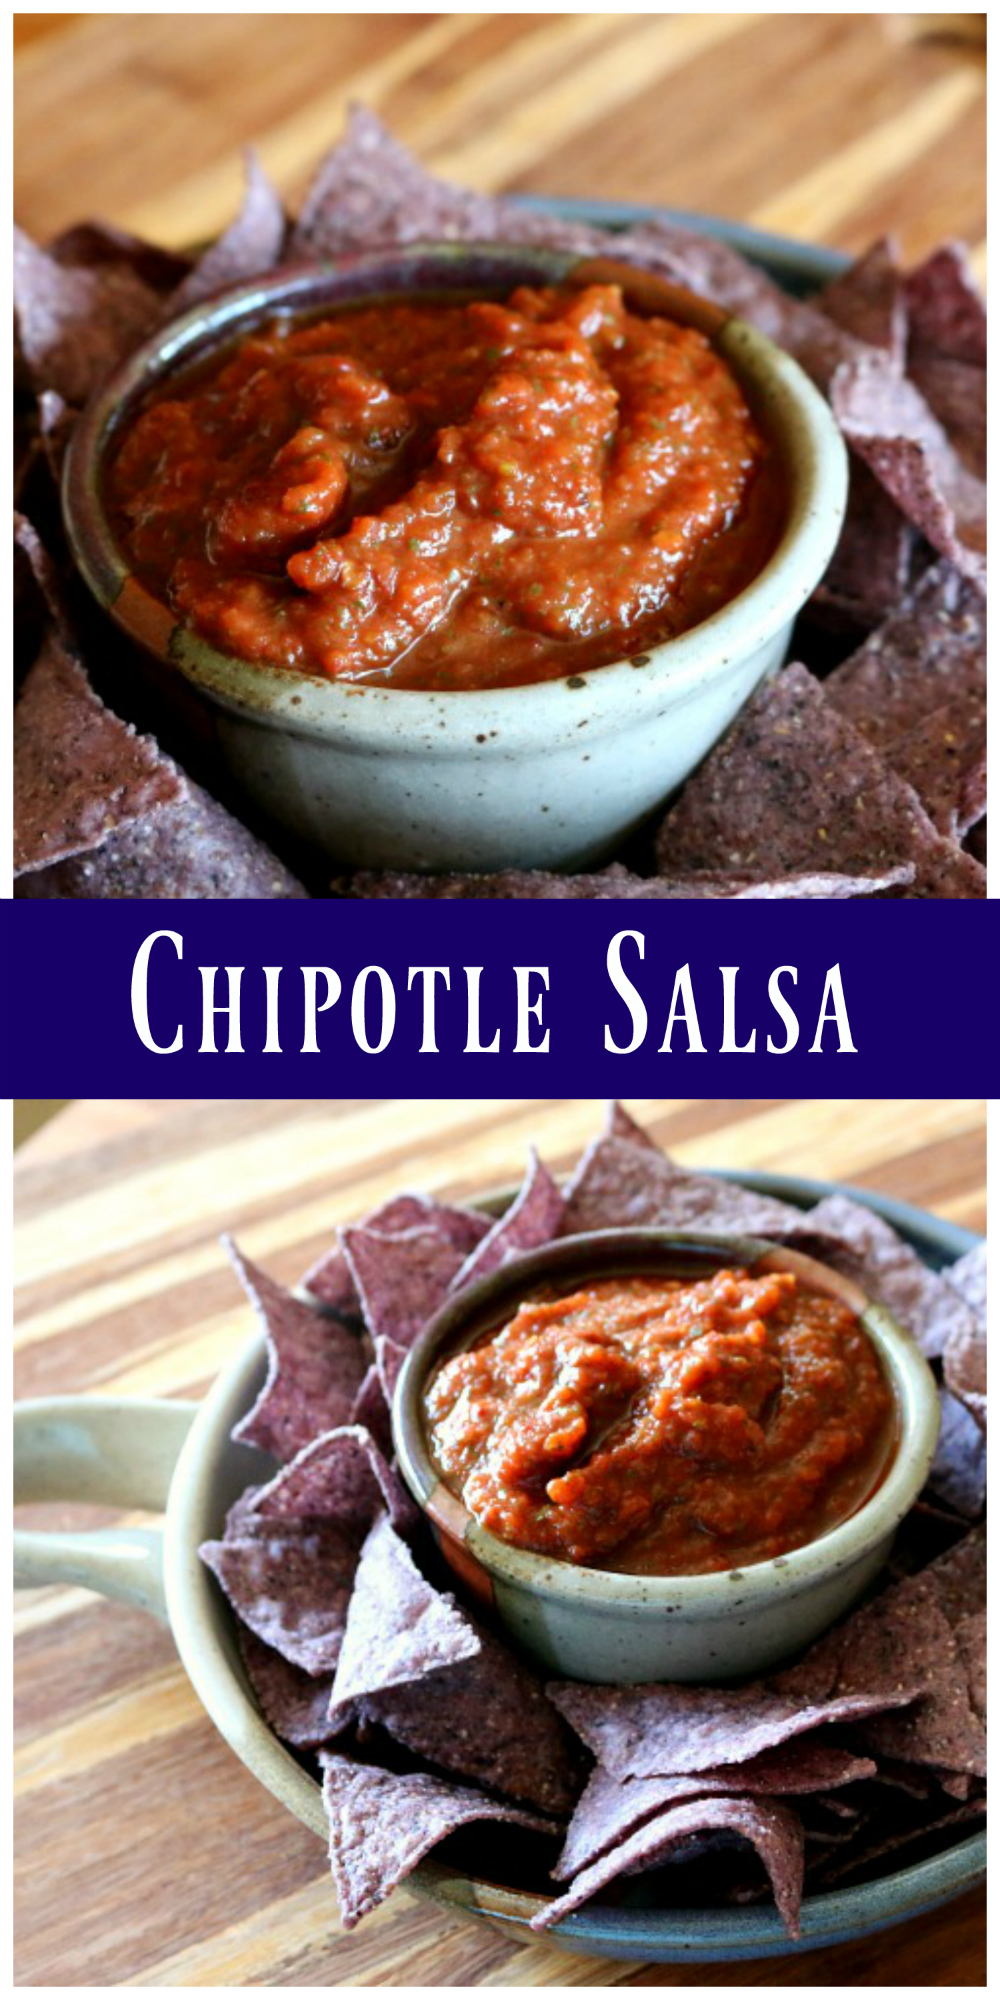 Great party recipe for homemade Chipotle Salsa